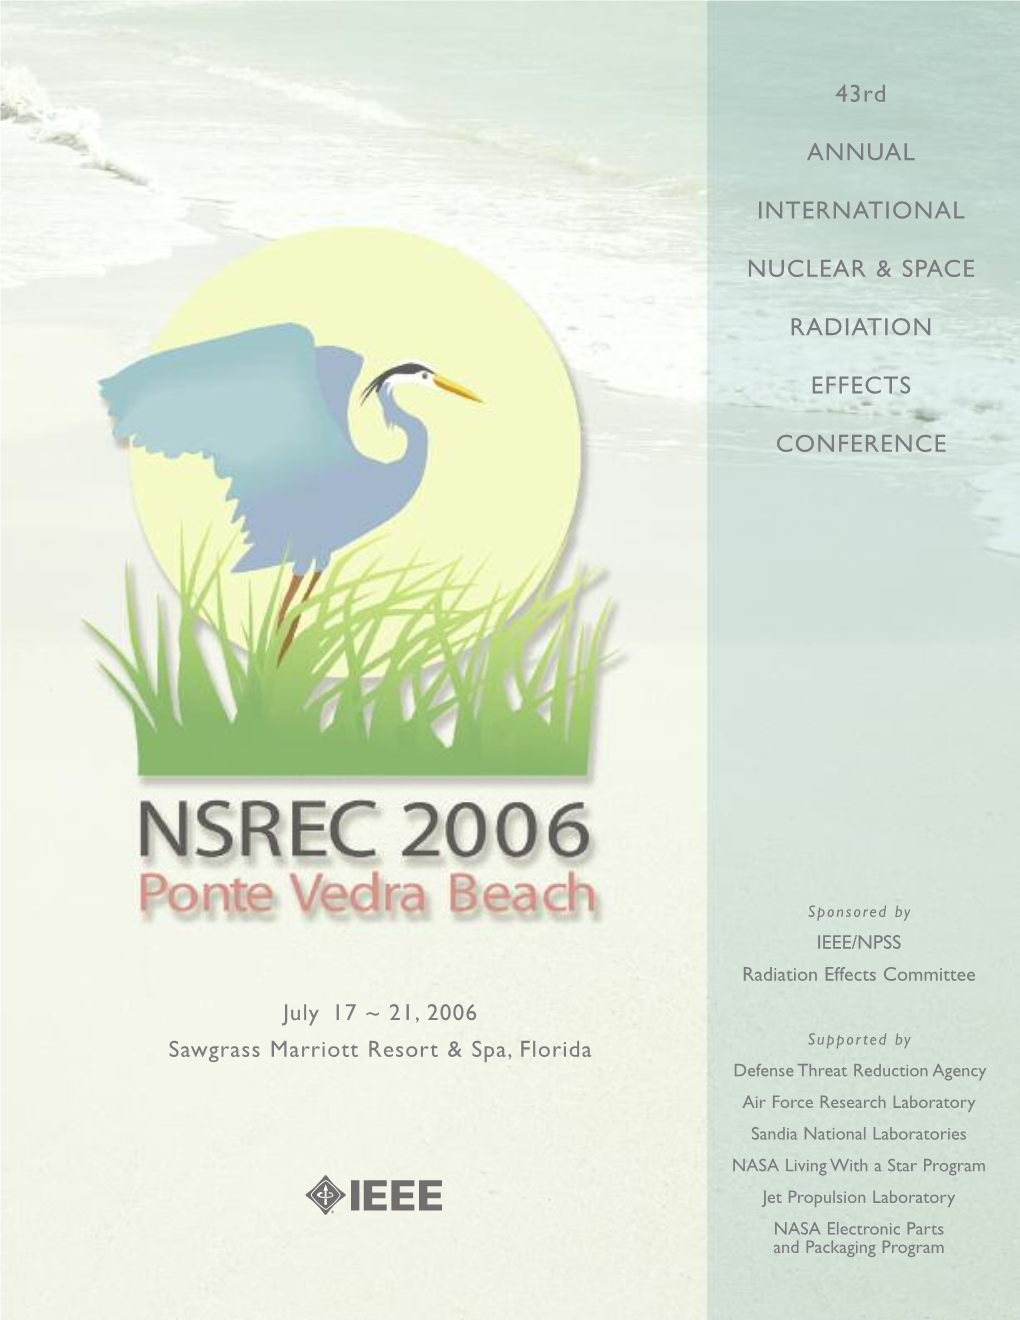 2006 NSREC and Will Be Offering Discounted Rates for Conference Attendees